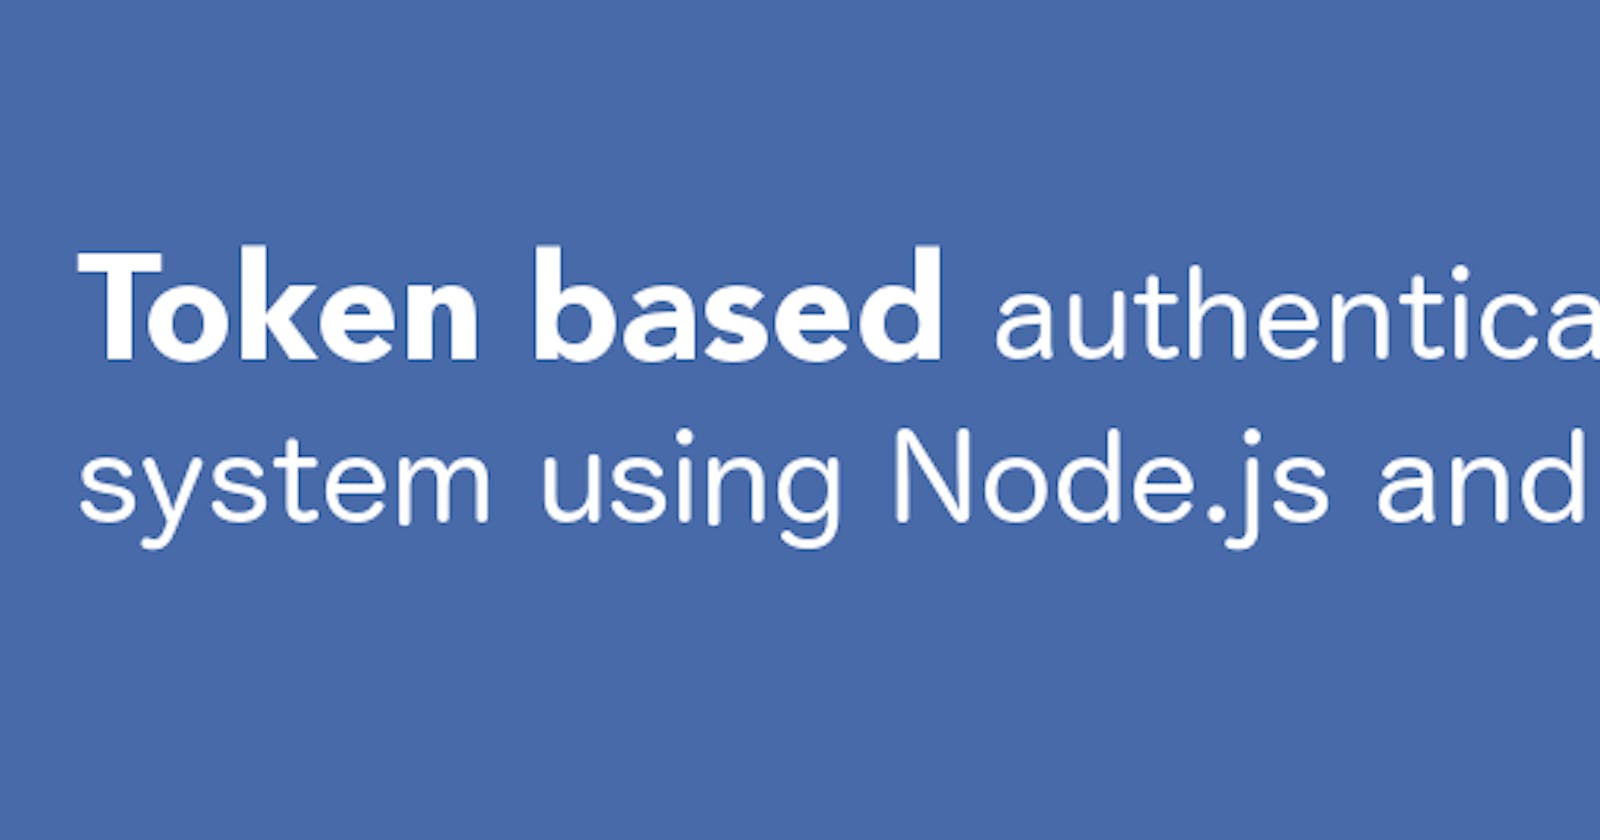 Building token based authentication using NodeJs and RethinkDB